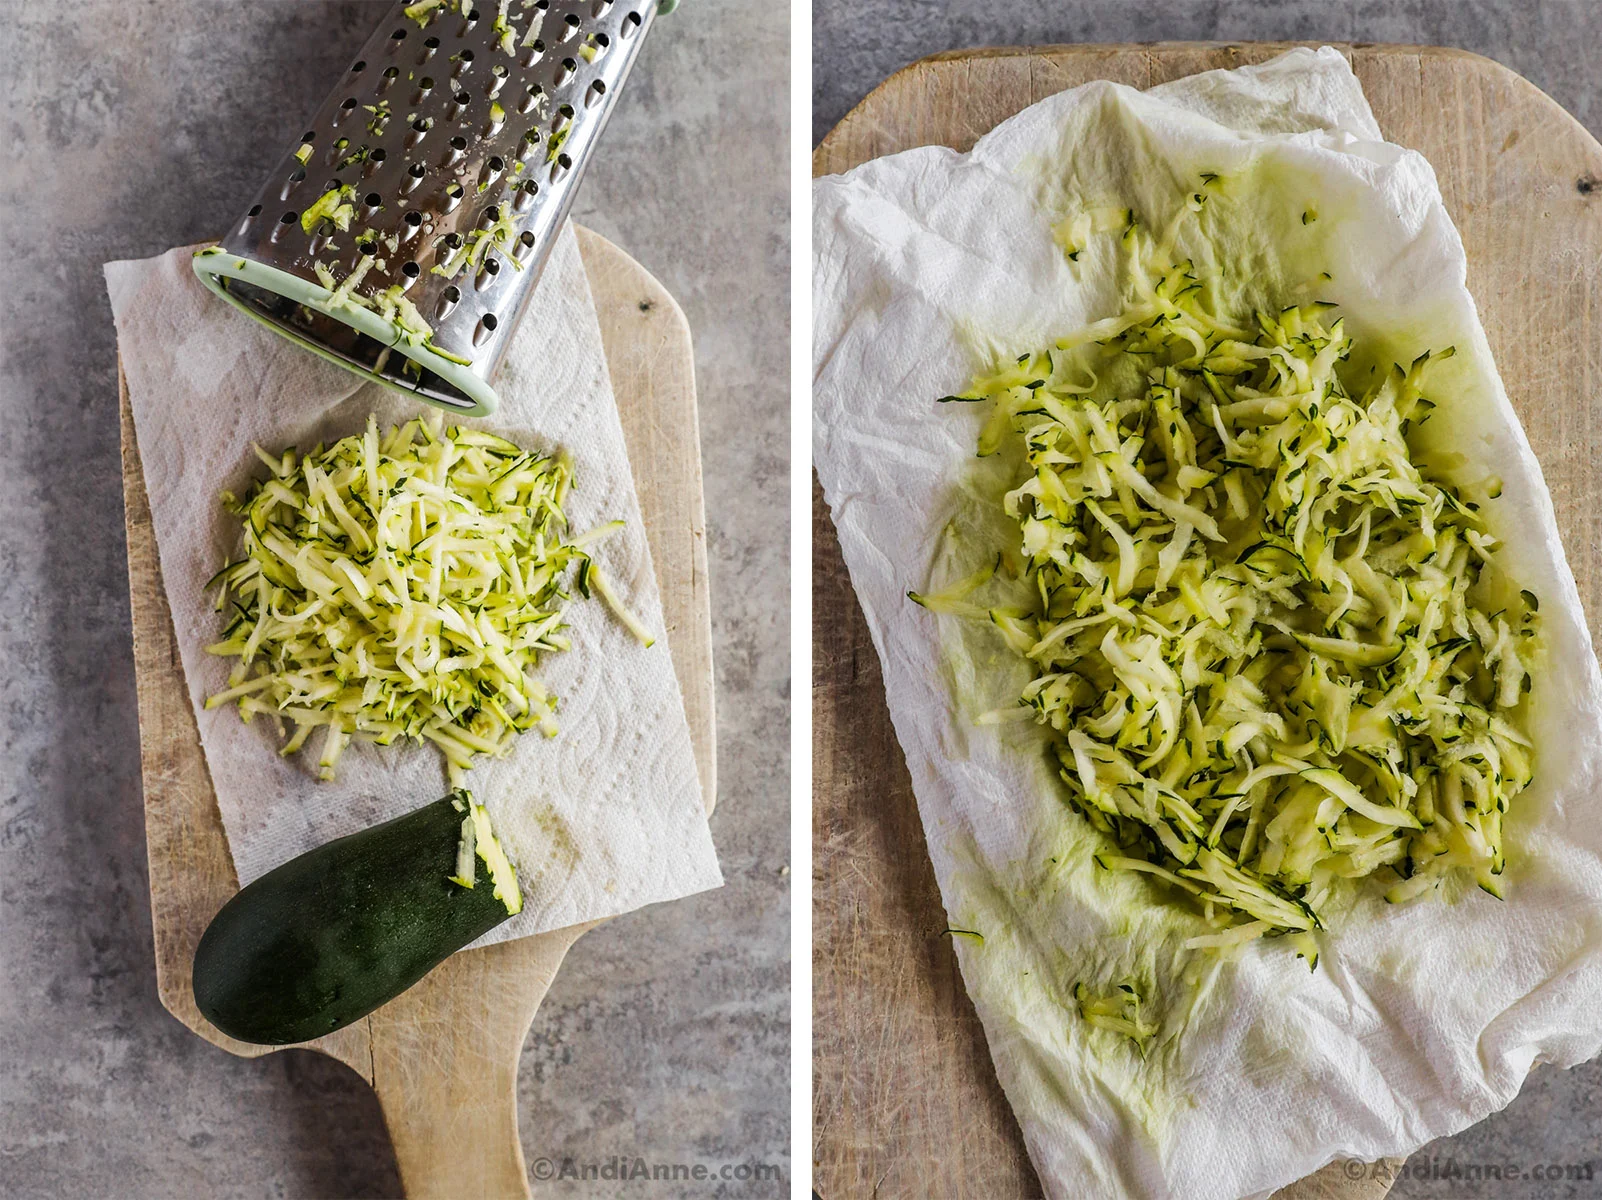 Shredded zucchini on paper towel beside a cheese grater.